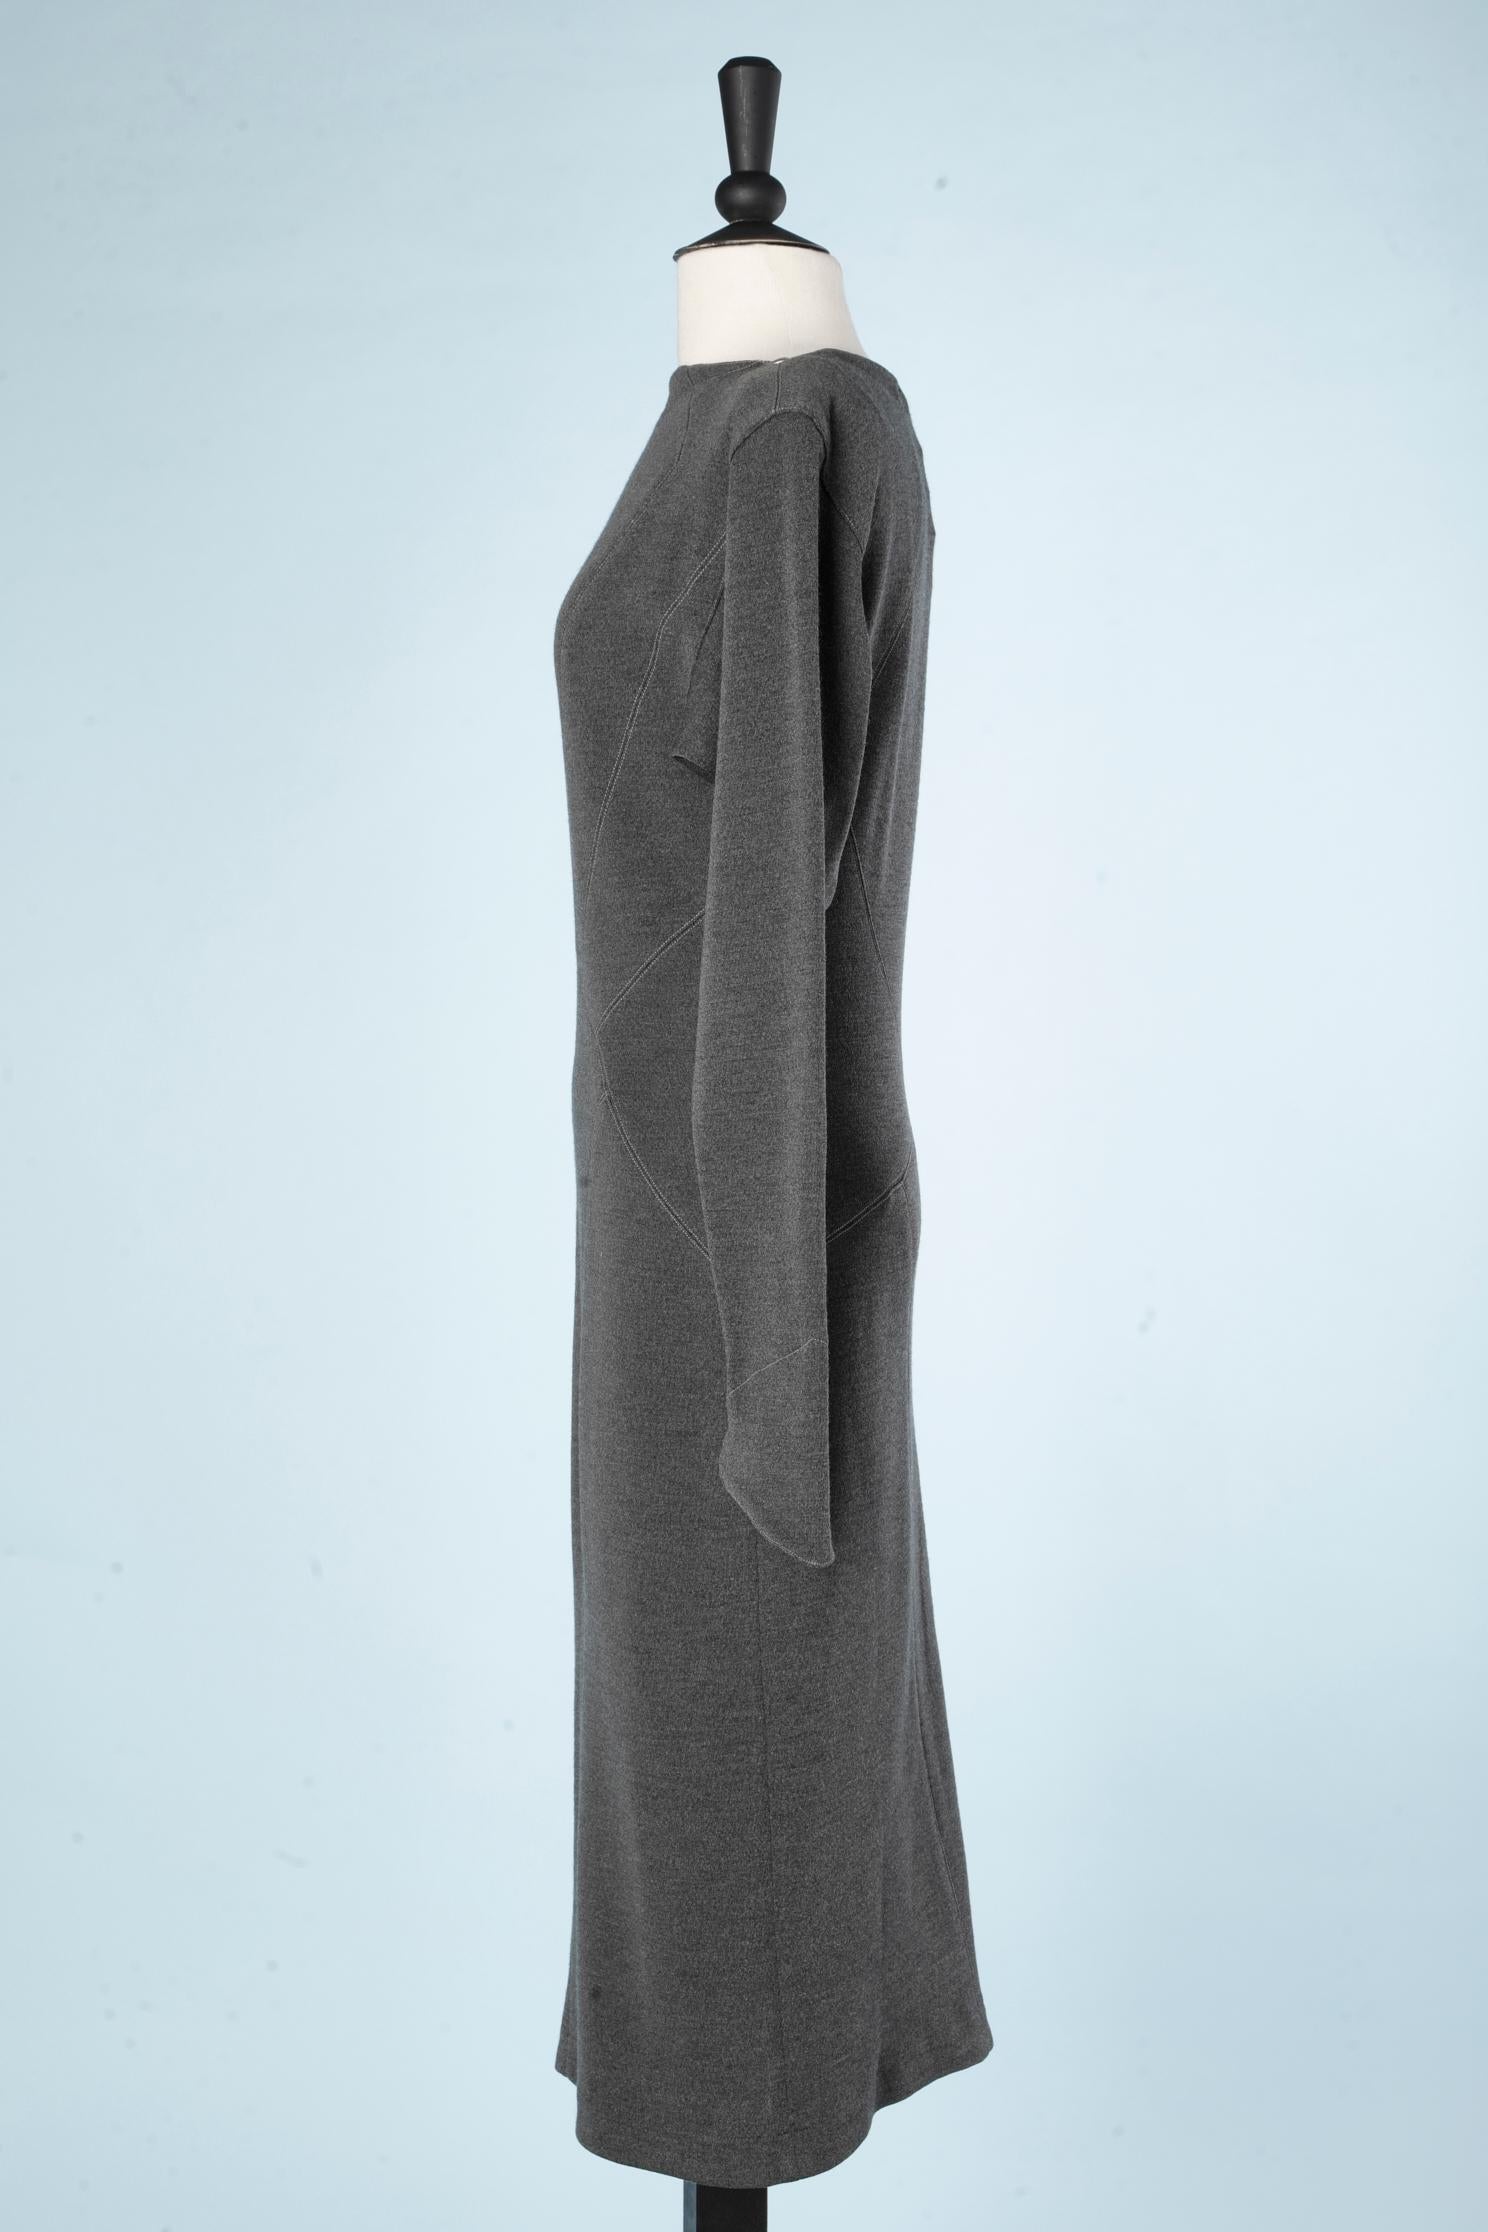 Grey wool jersey dress with zip opening AlaÏa In Excellent Condition For Sale In Saint-Ouen-Sur-Seine, FR